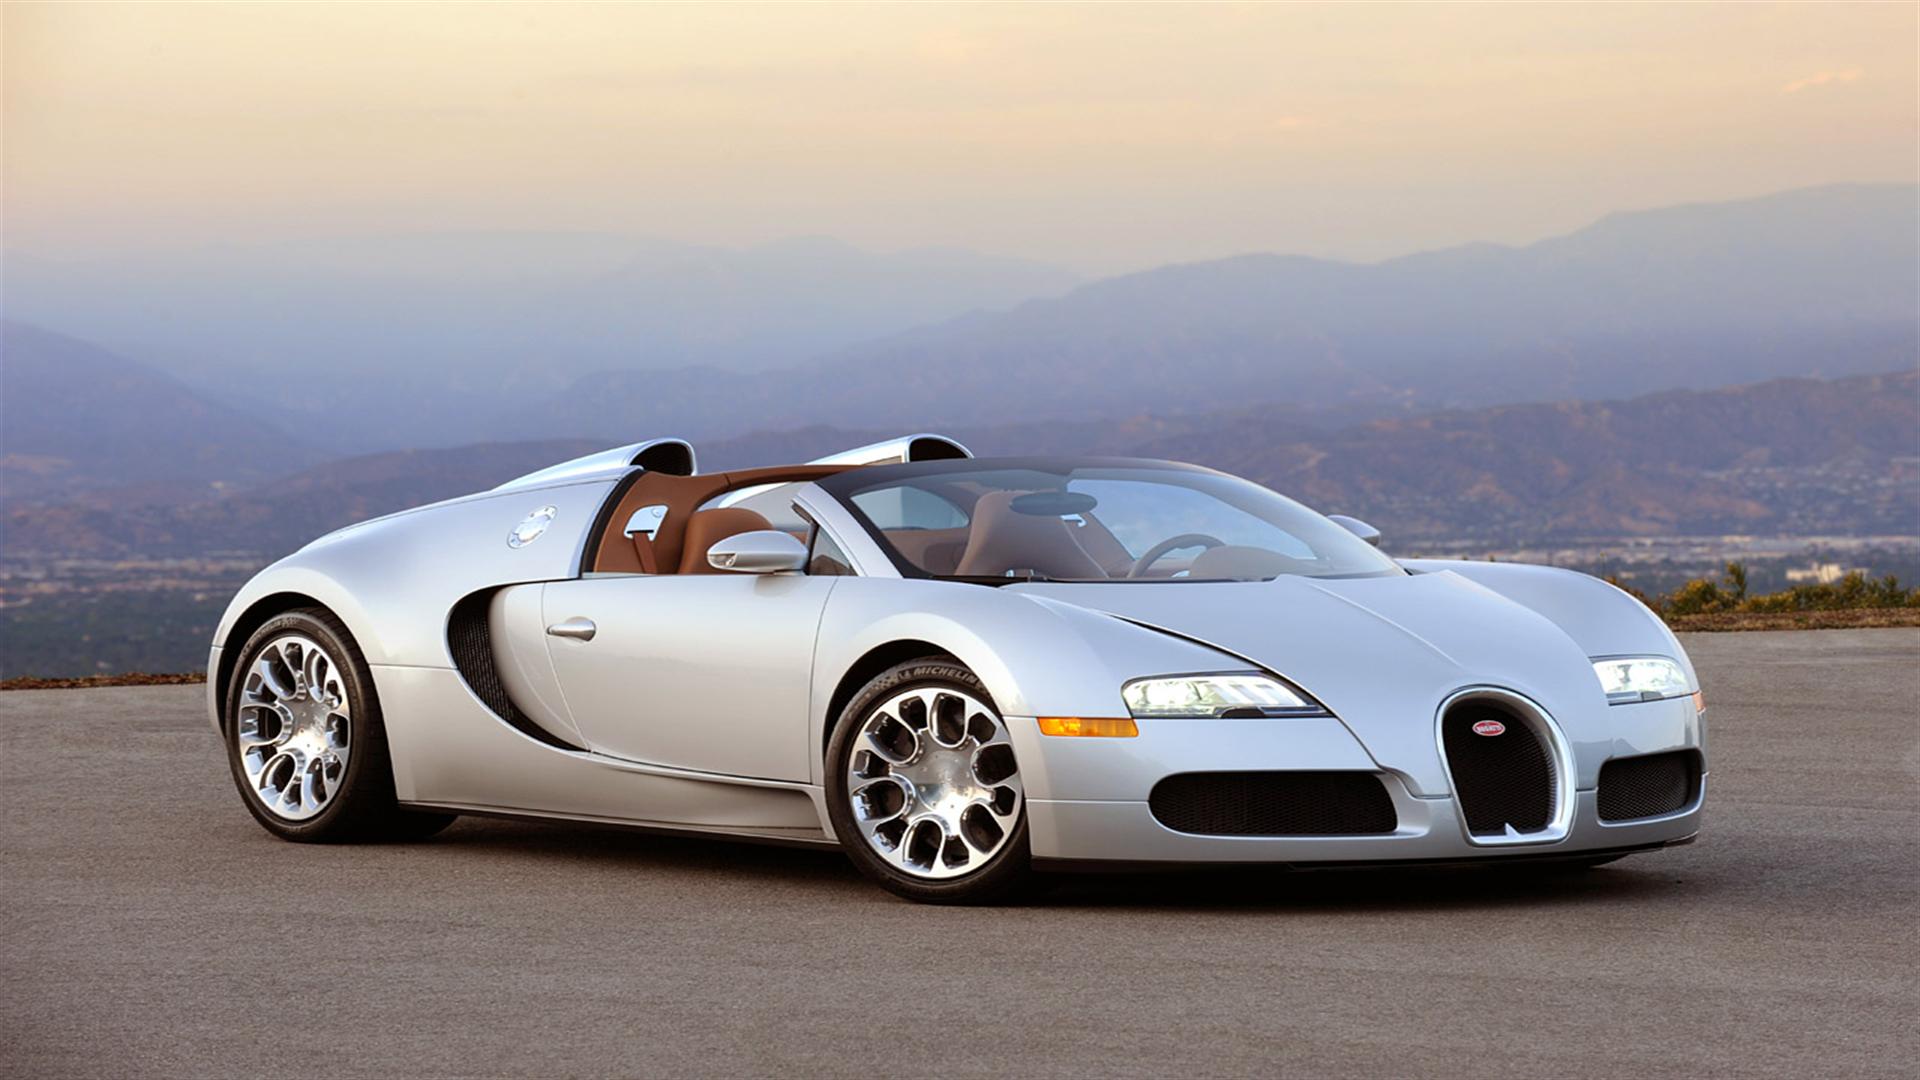 You Can Bugatti Wallpaper HD 1080p In Your Puter By